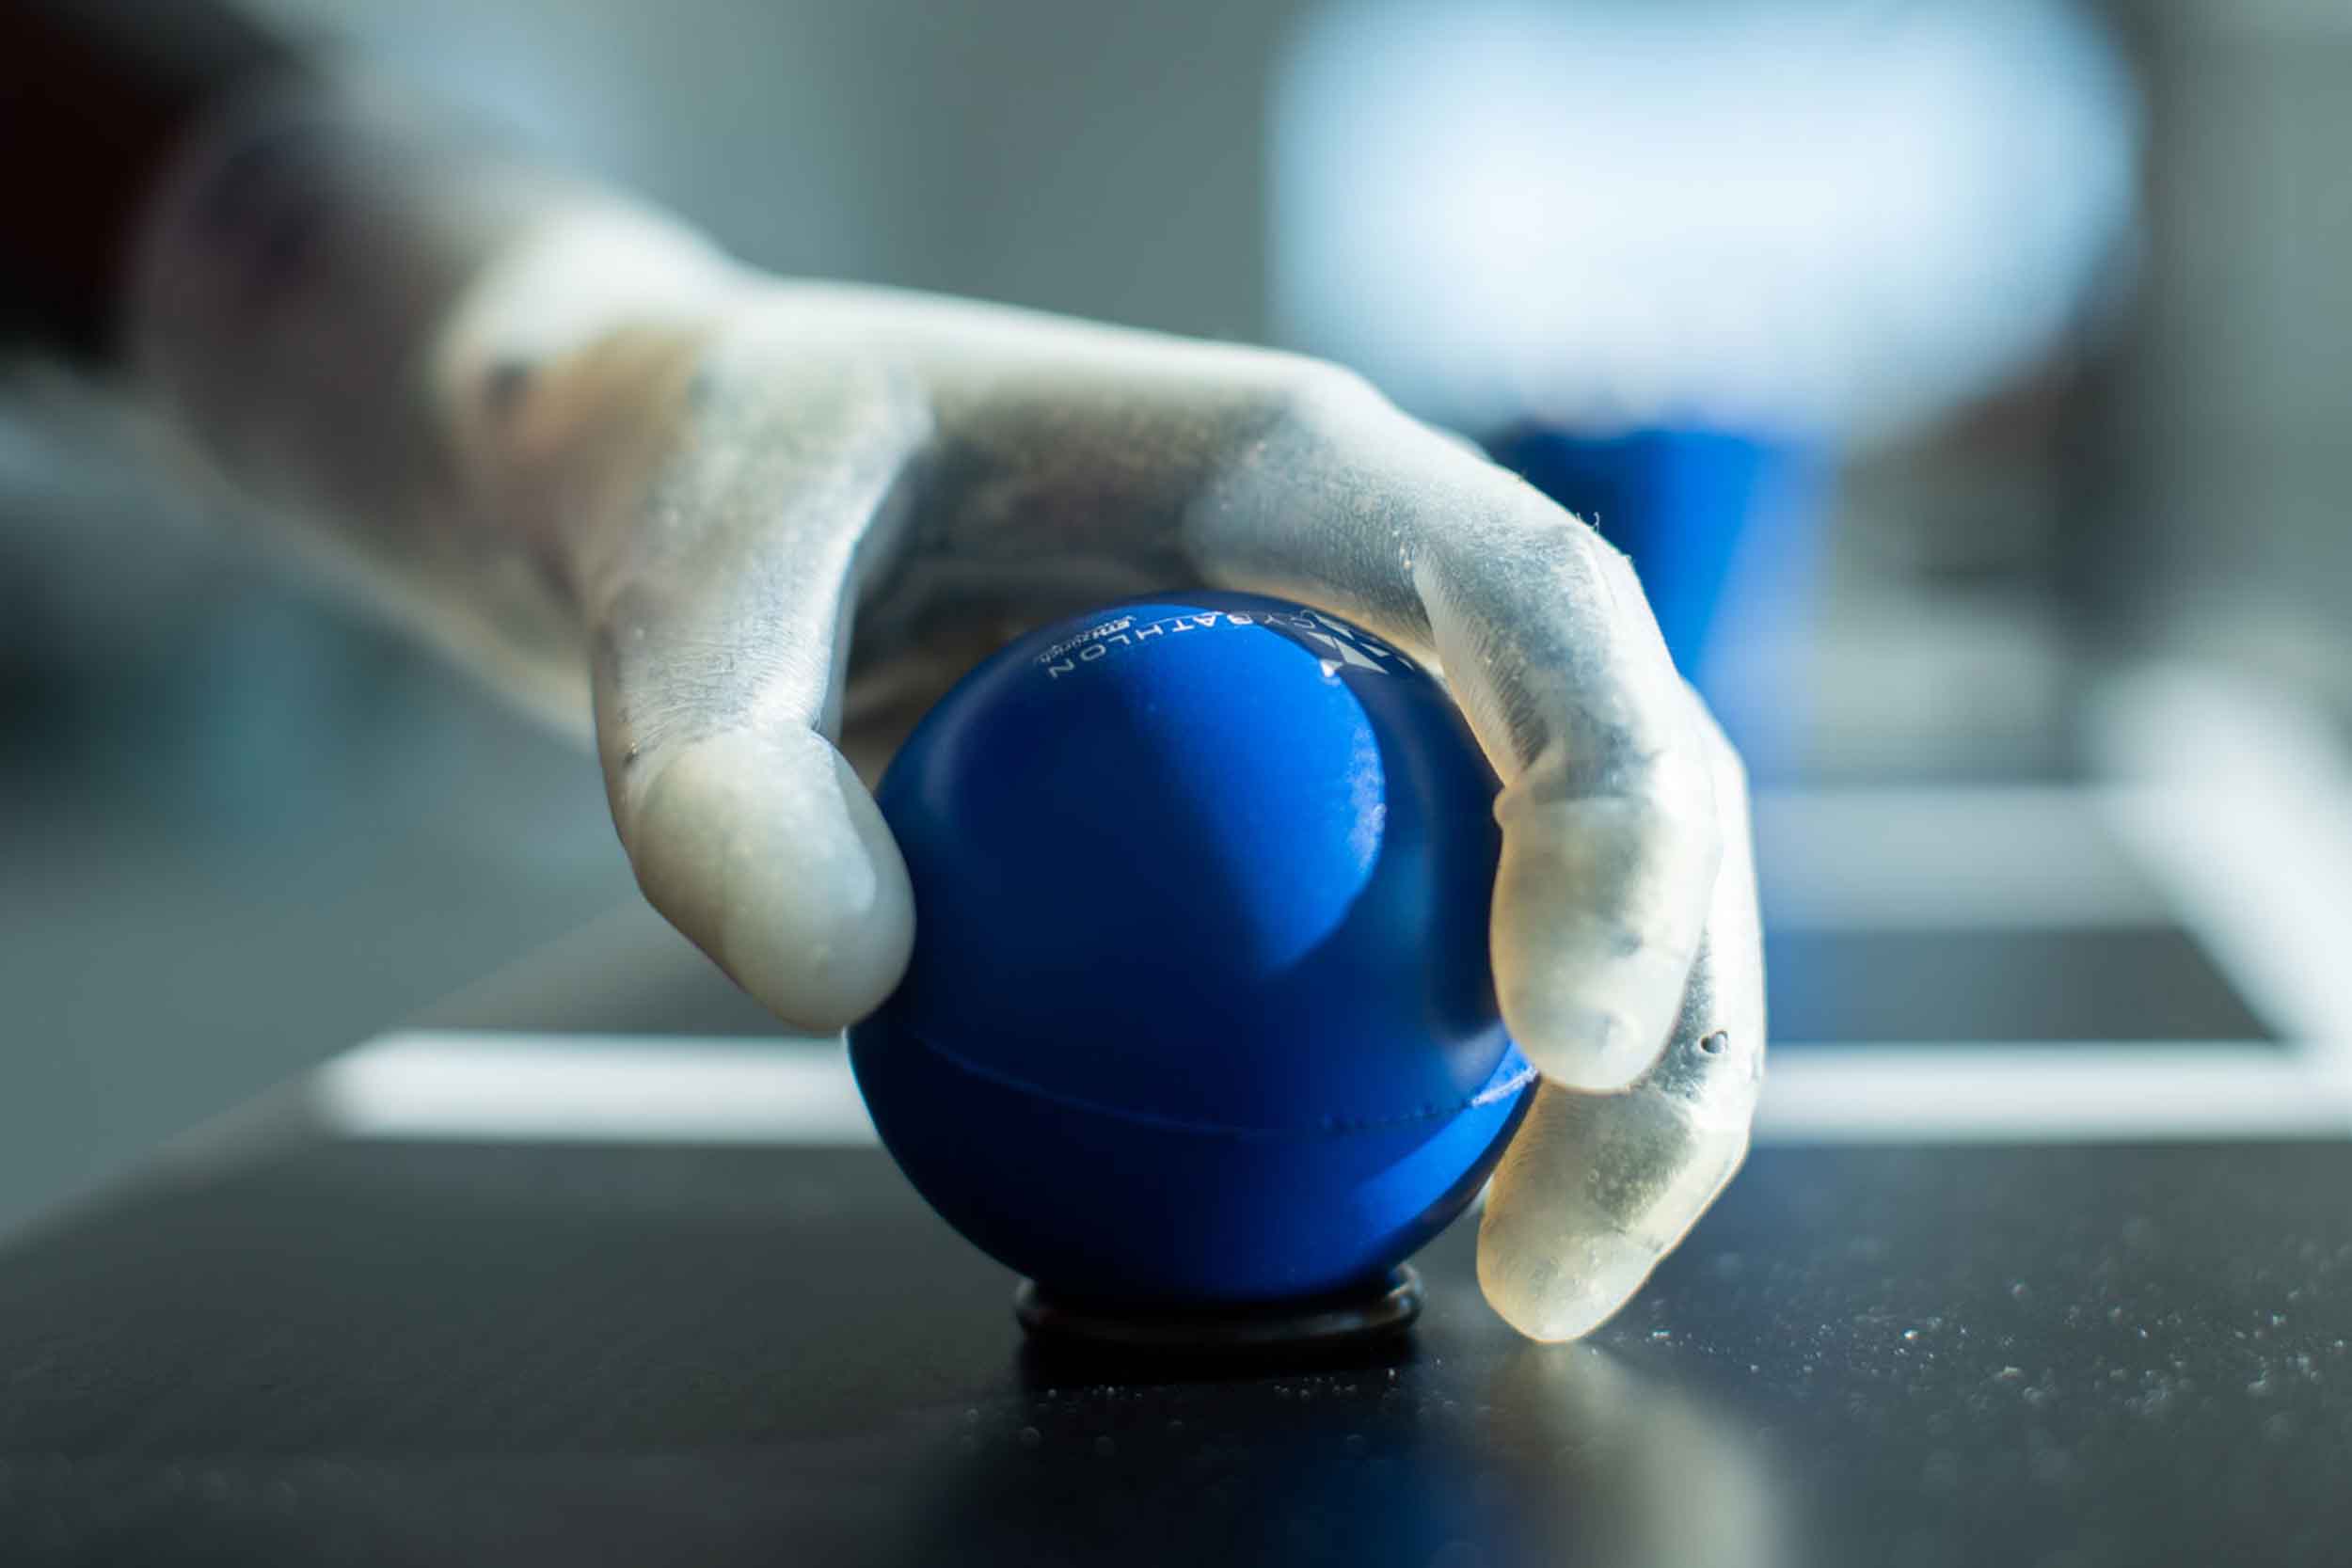 The SoftHand Pro prosthetic hand grips a blue ball. The hand is covered with a clear silicone material and resembles a human hand